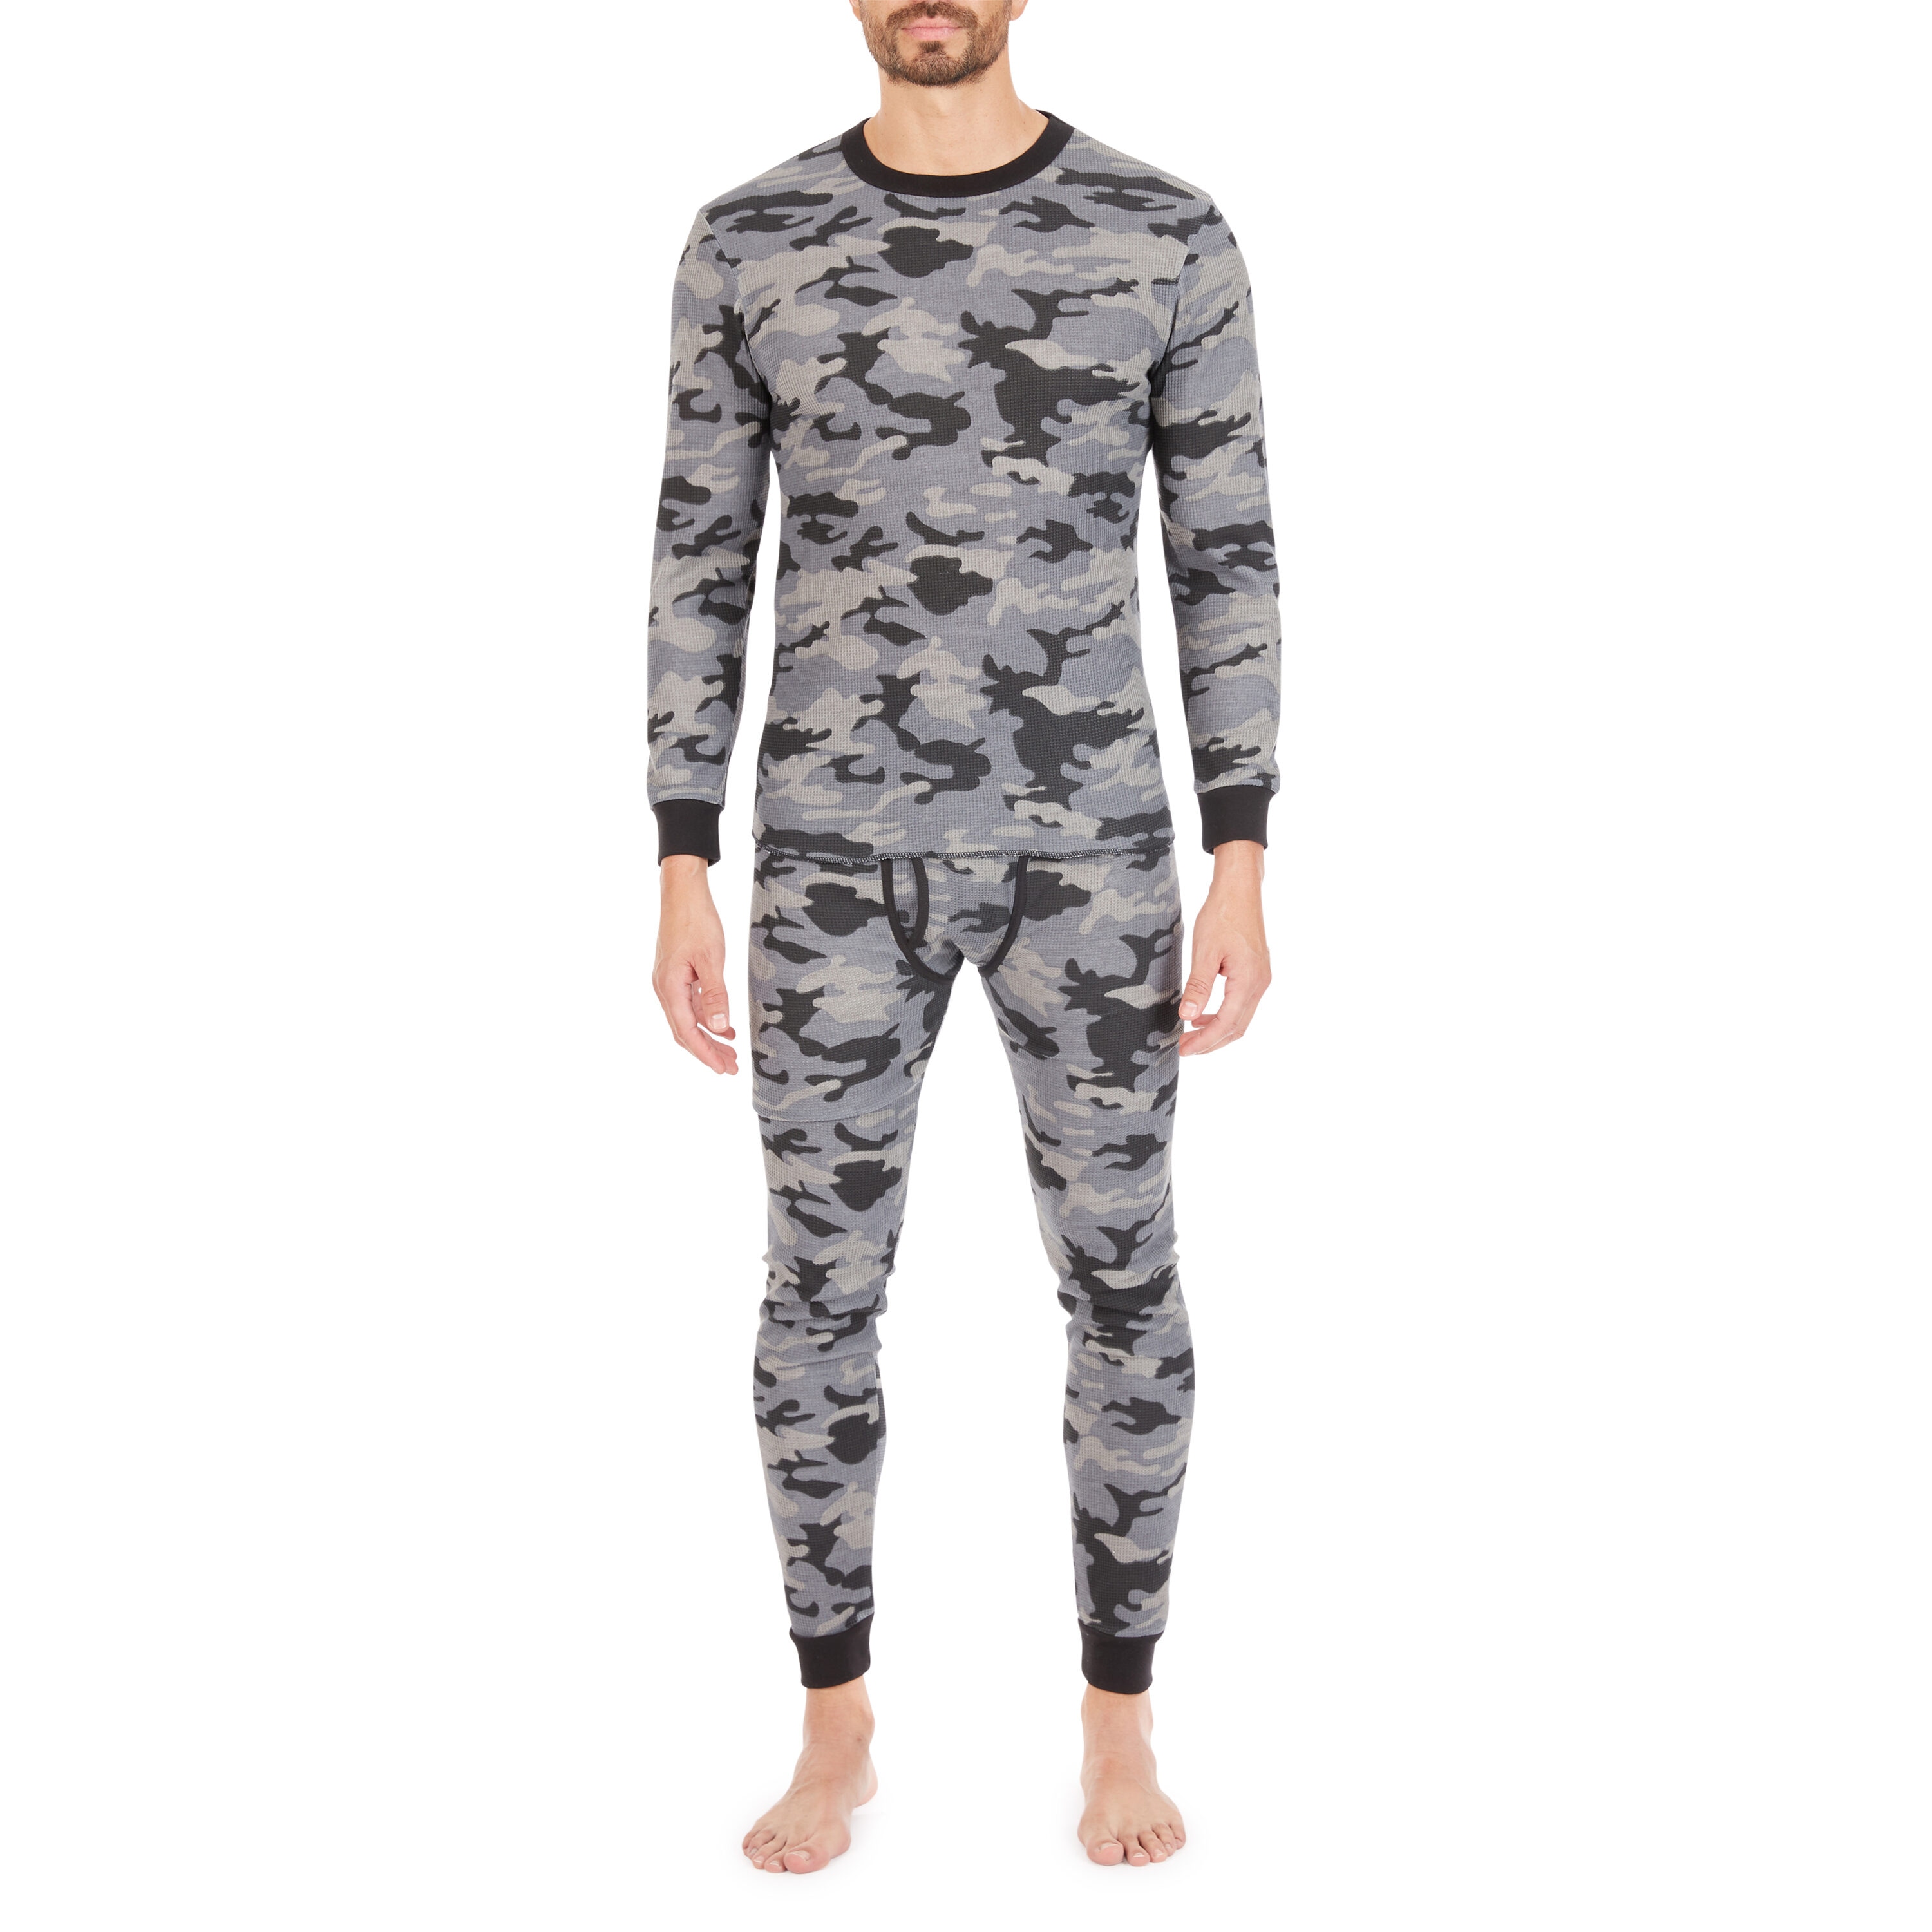 Smith's Workwear Black Camo-199g Cotton/Polyester Thermal Base